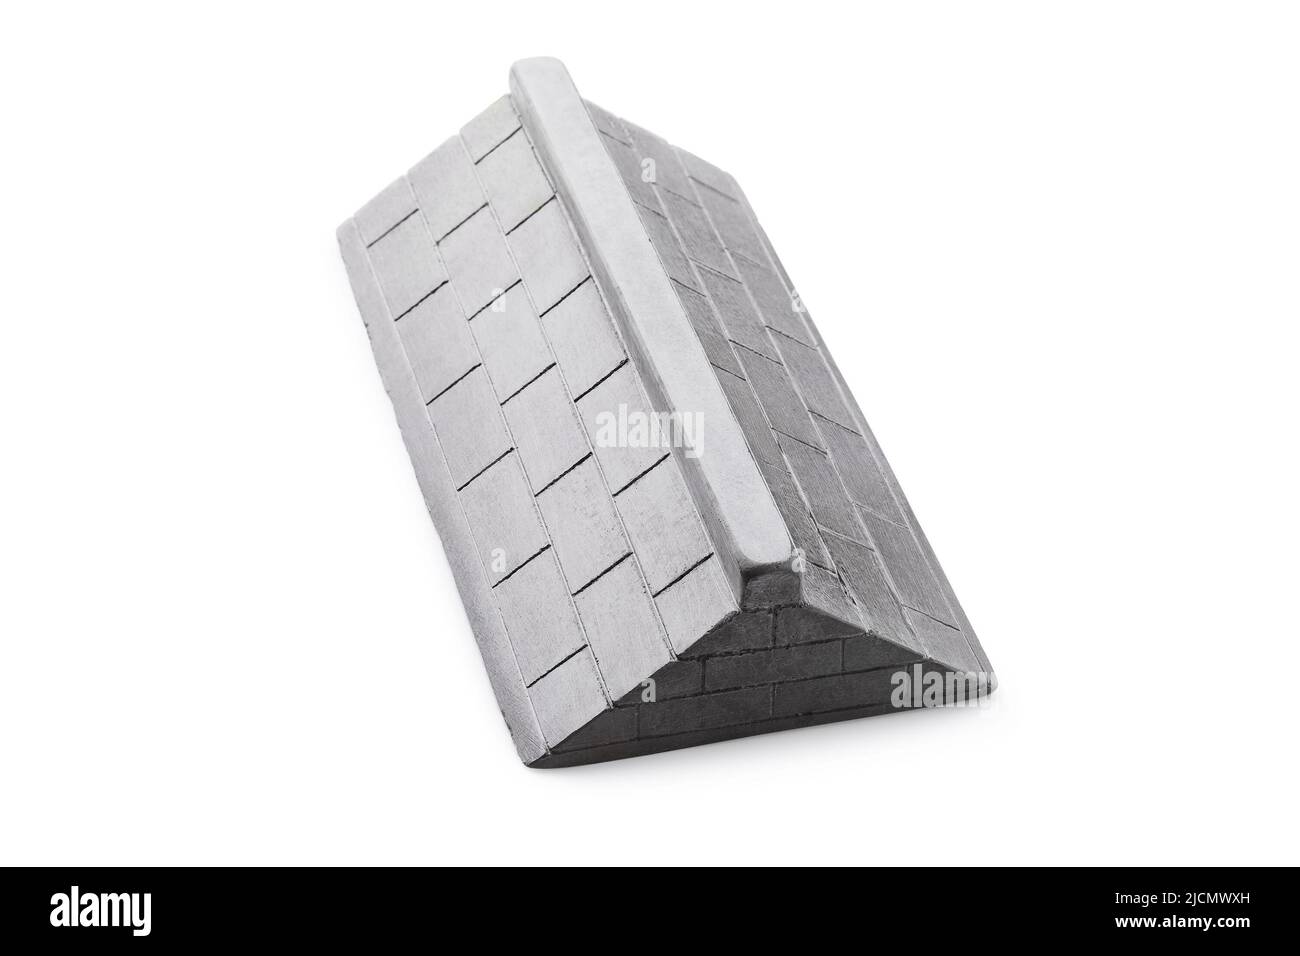 Gray plaster ramp with two sides for fingerboarding, isolated on a white background Stock Photo